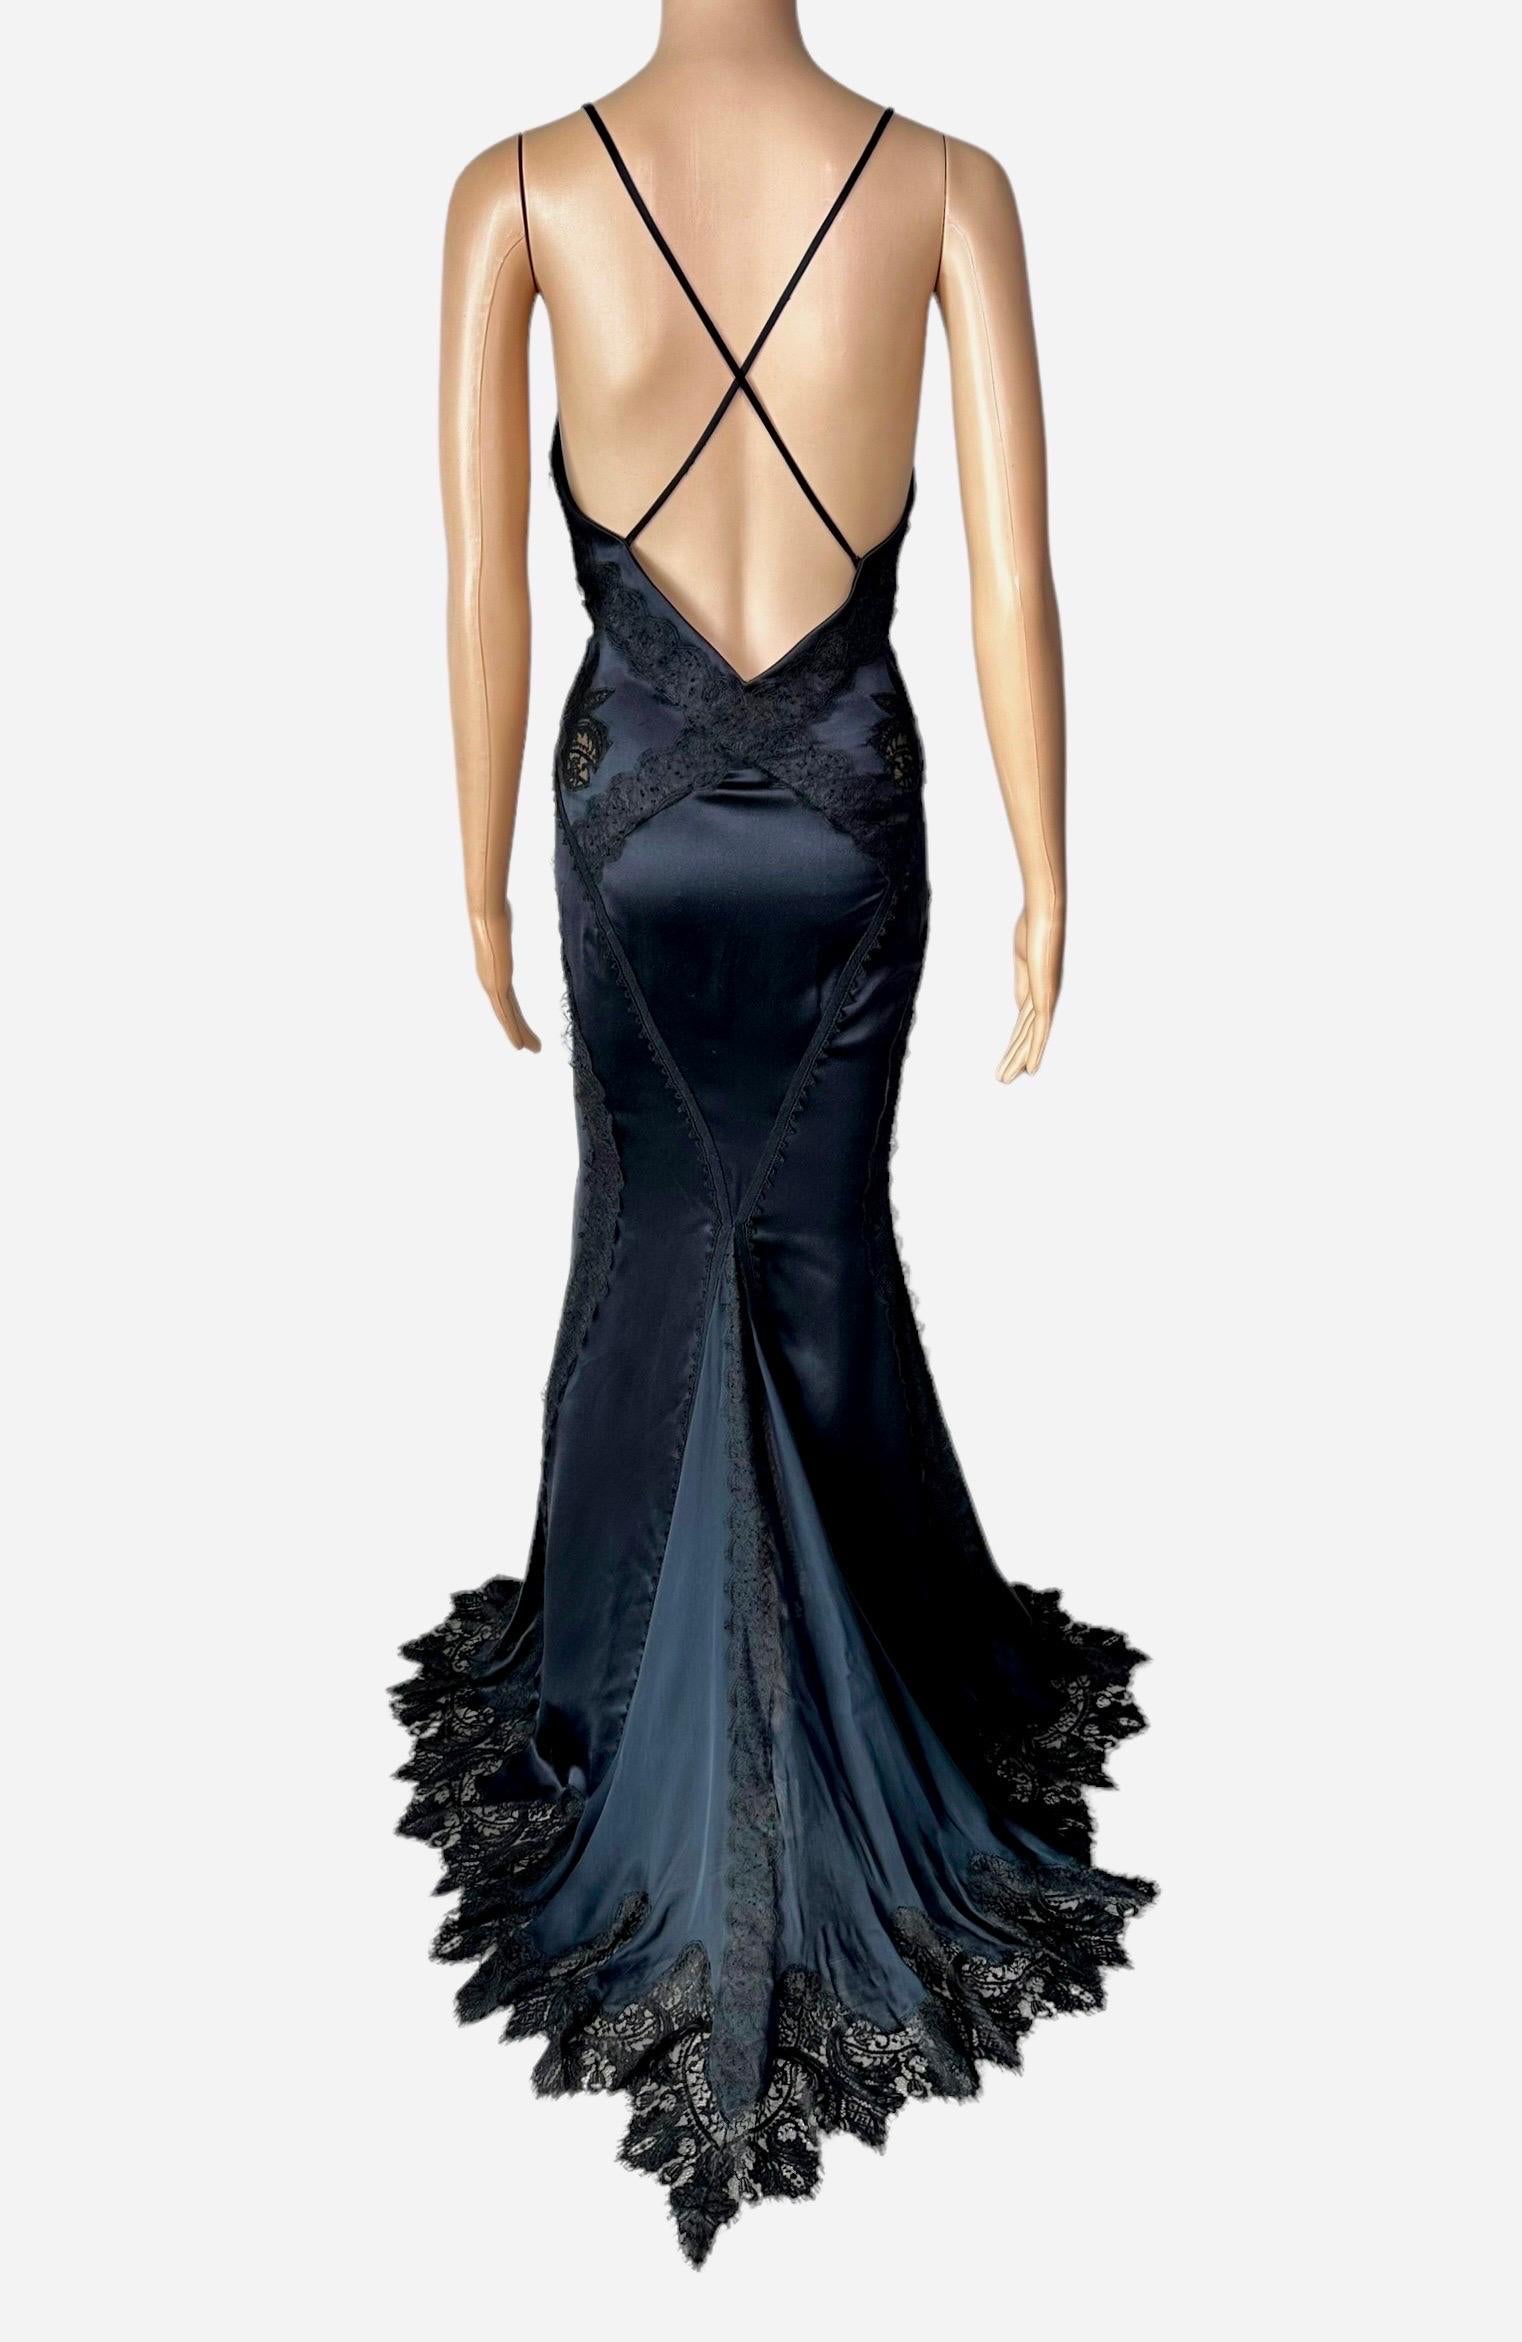 Versace c.2006 Plunging Neckline Sheer Lace Panels Backless Evening Dress Gown  For Sale 3